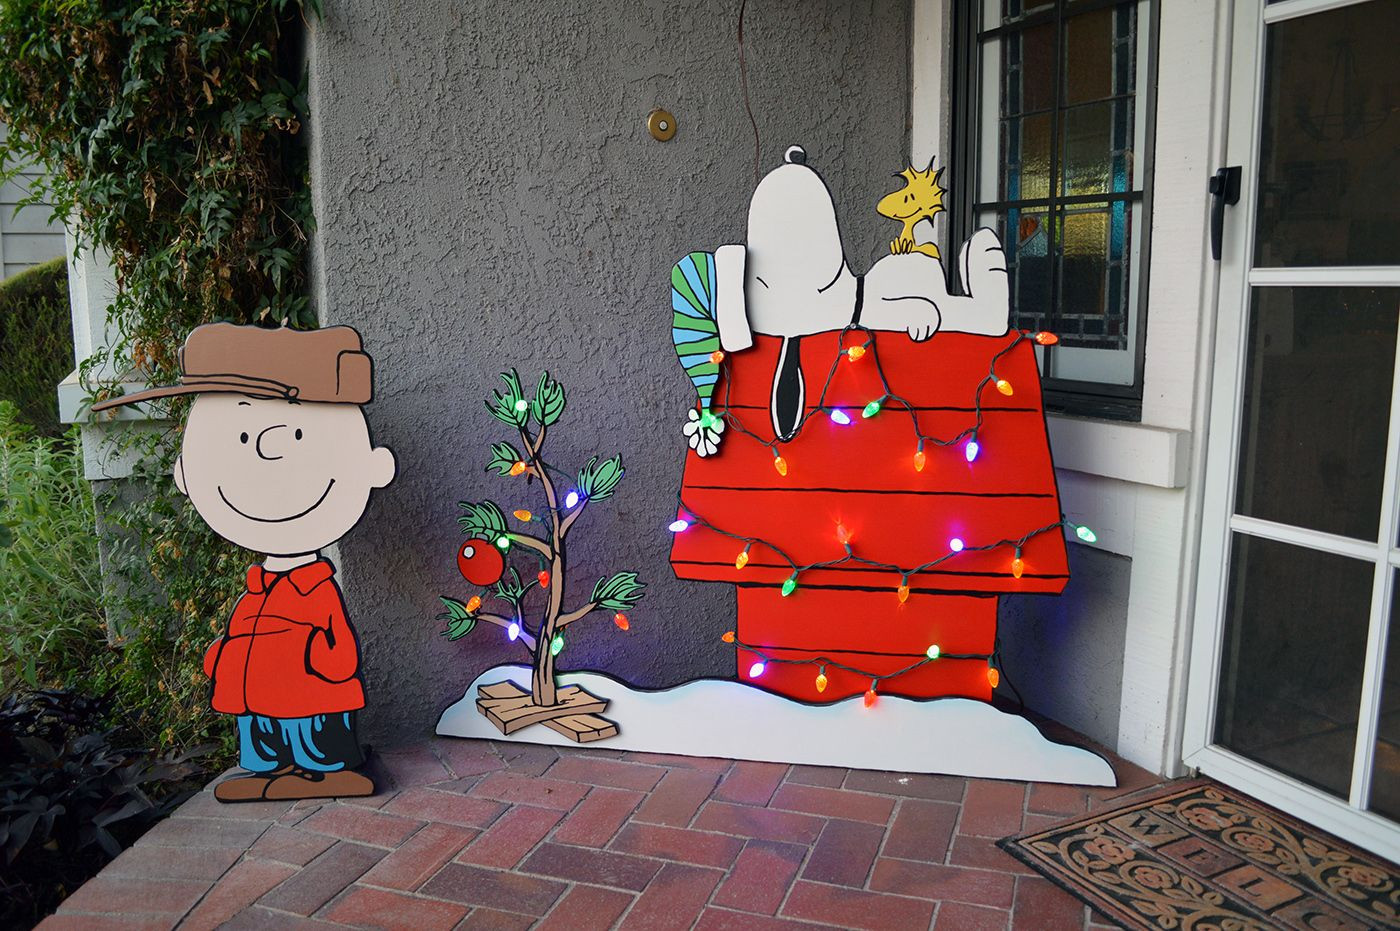 Peanut Outdoor Christmas Decorations
 Made some Peanuts themed yard art for my wife will add